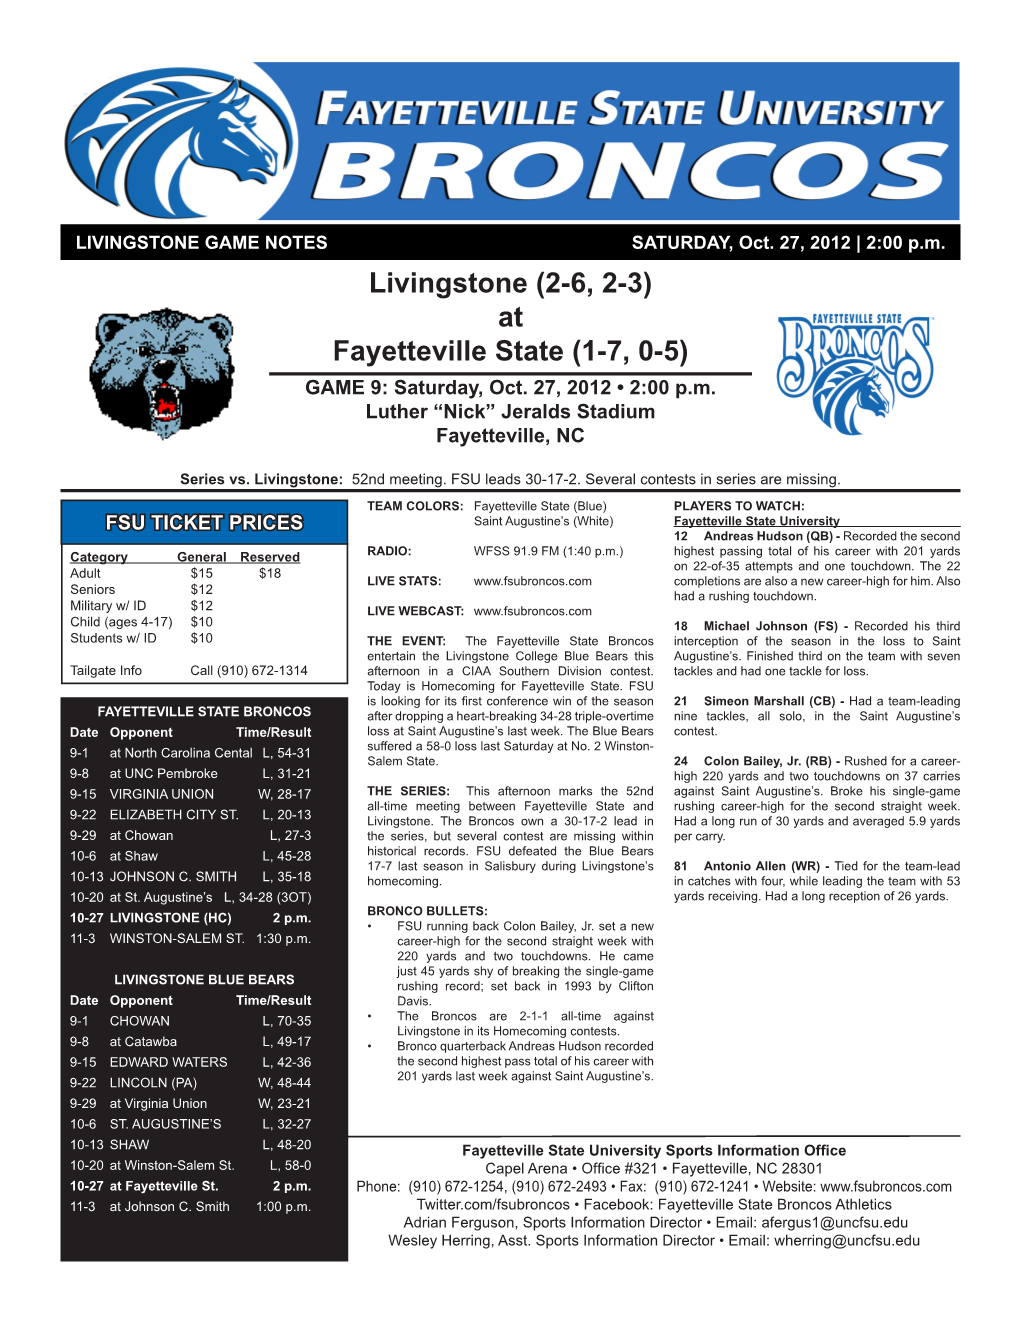 Livingstone (2-6, 2-3) at Fayetteville State (1-7, 0-5) GAME 9: Saturday, Oct